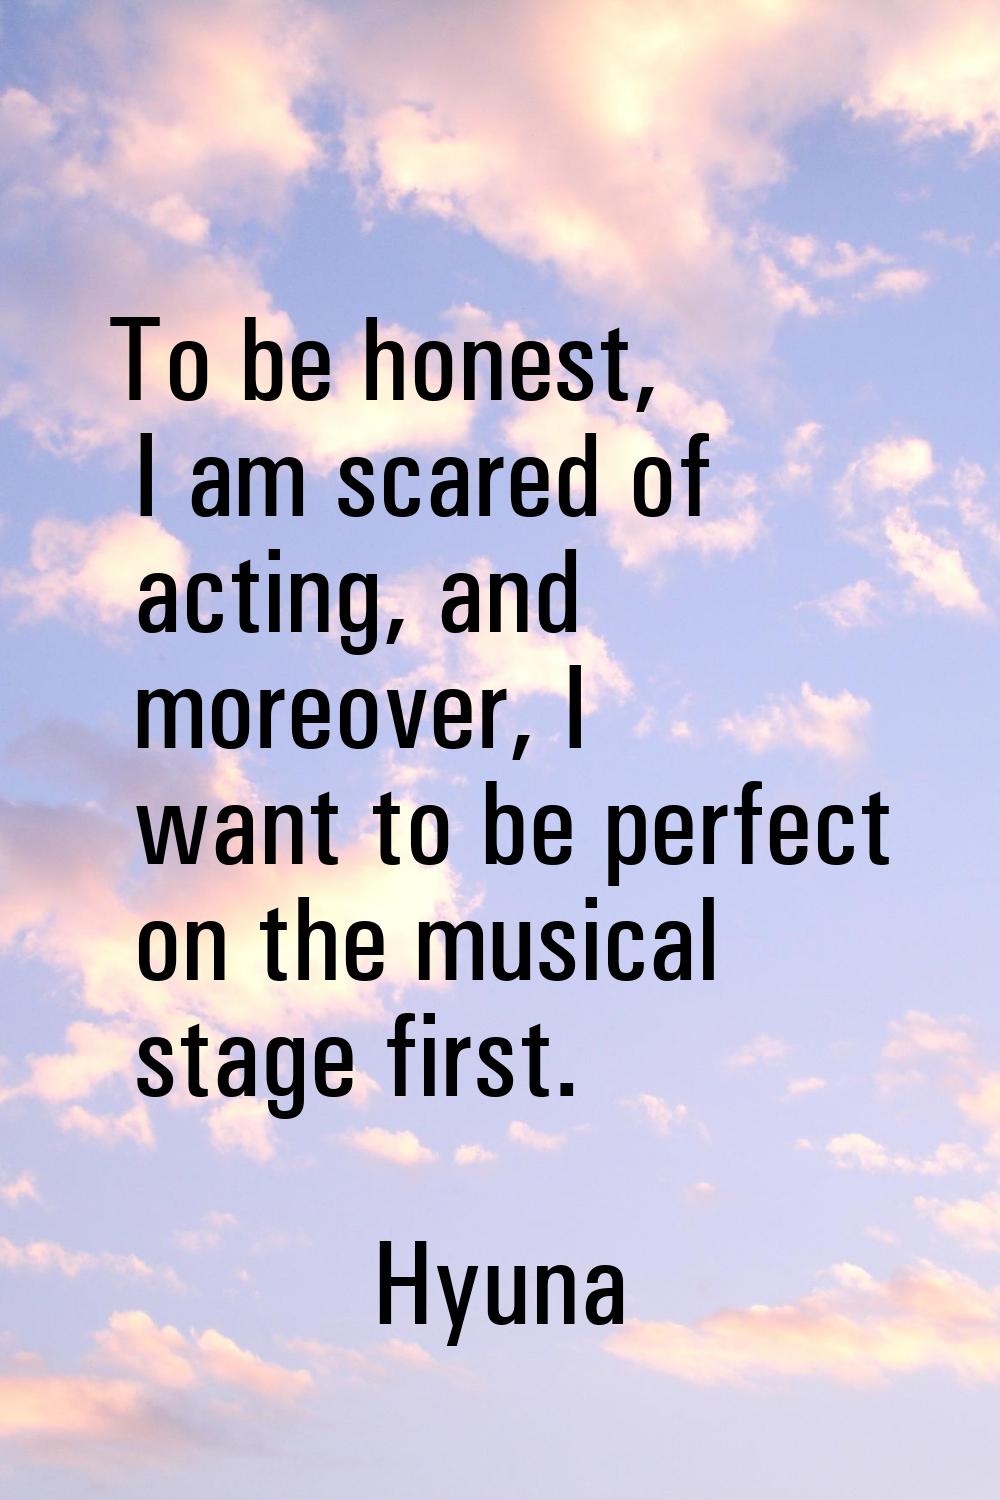 To be honest, I am scared of acting, and moreover, I want to be perfect on the musical stage first.